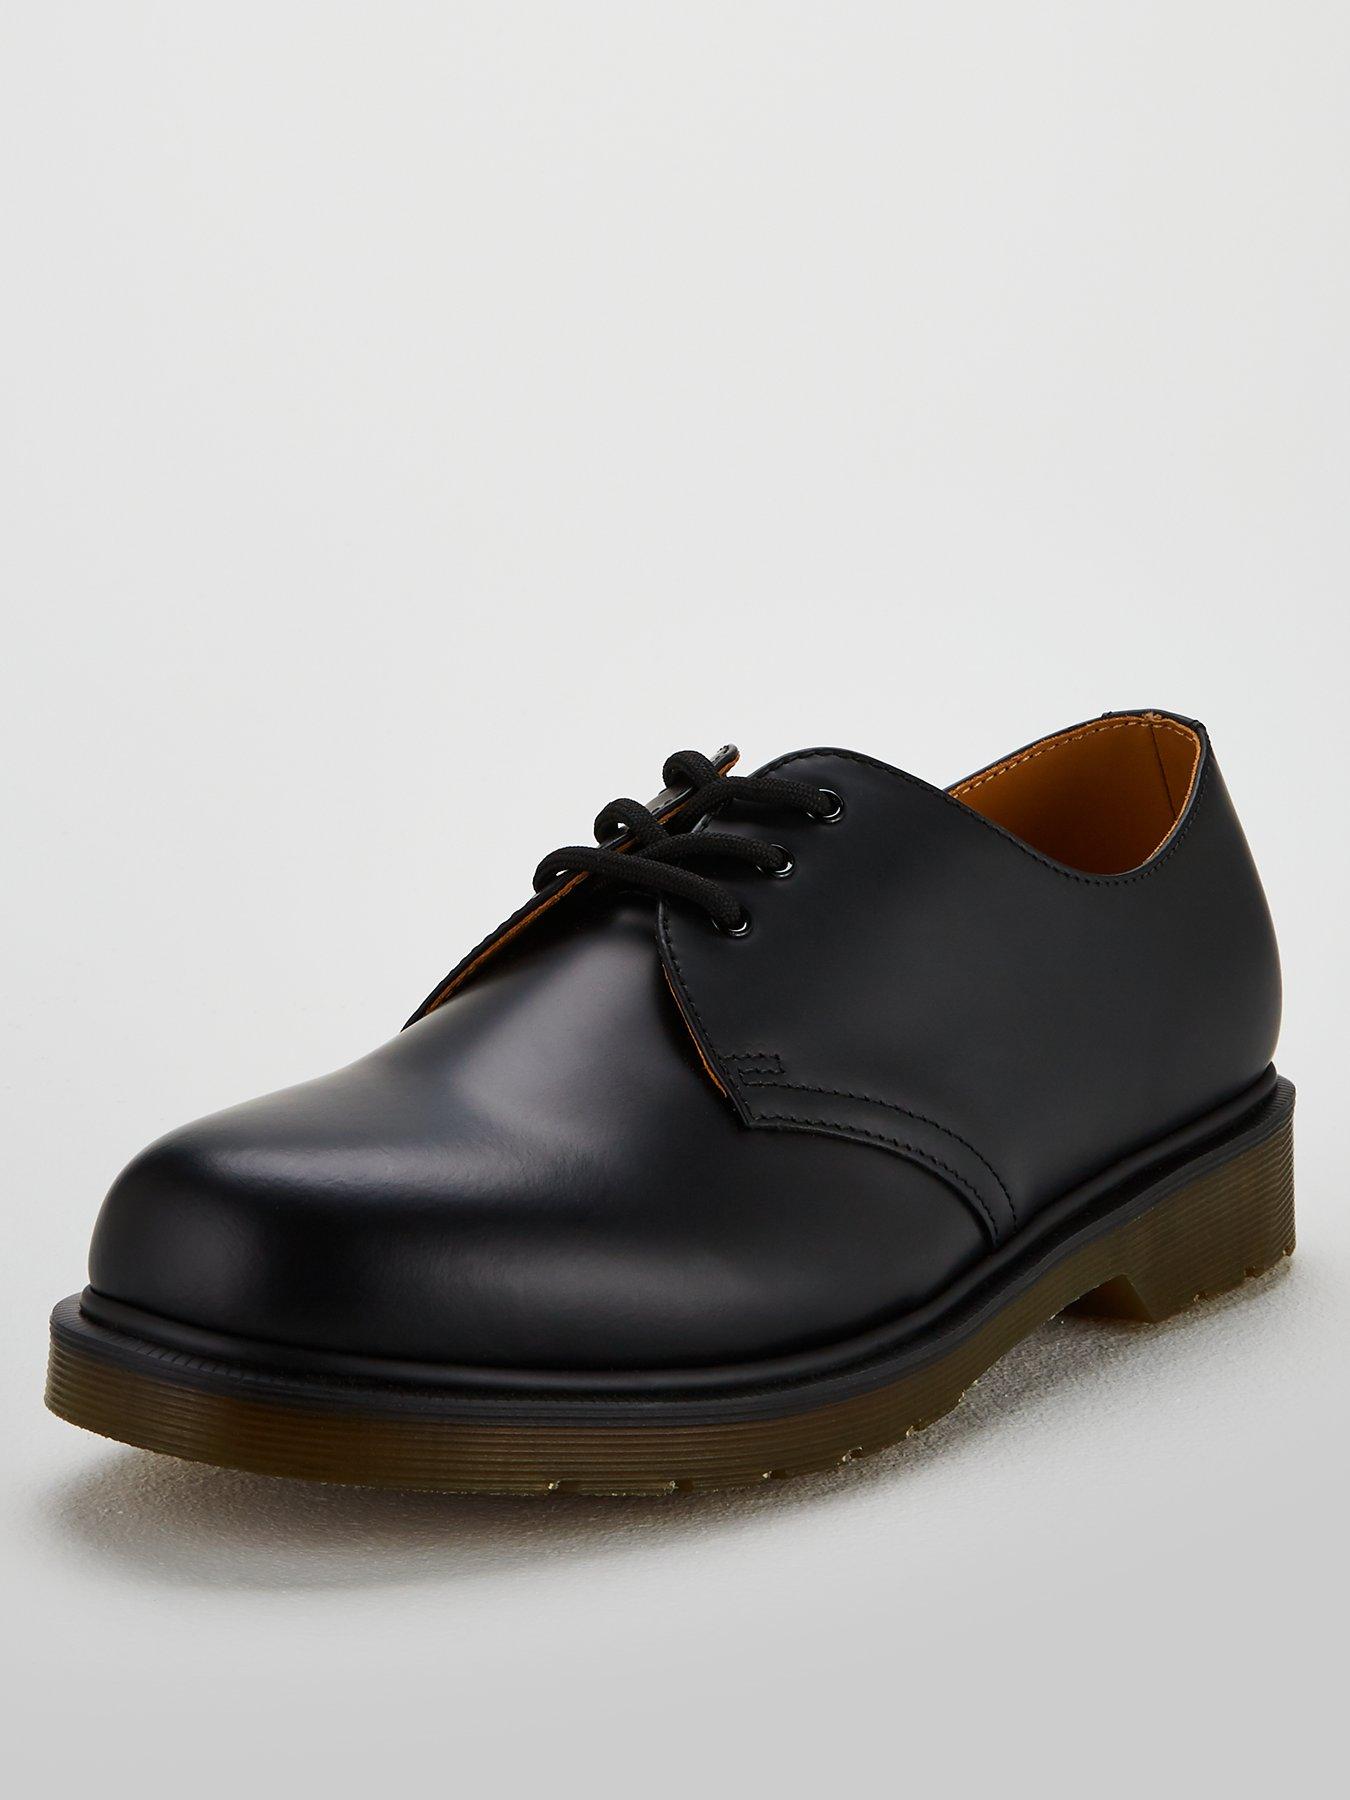 dr martens buy now pay later